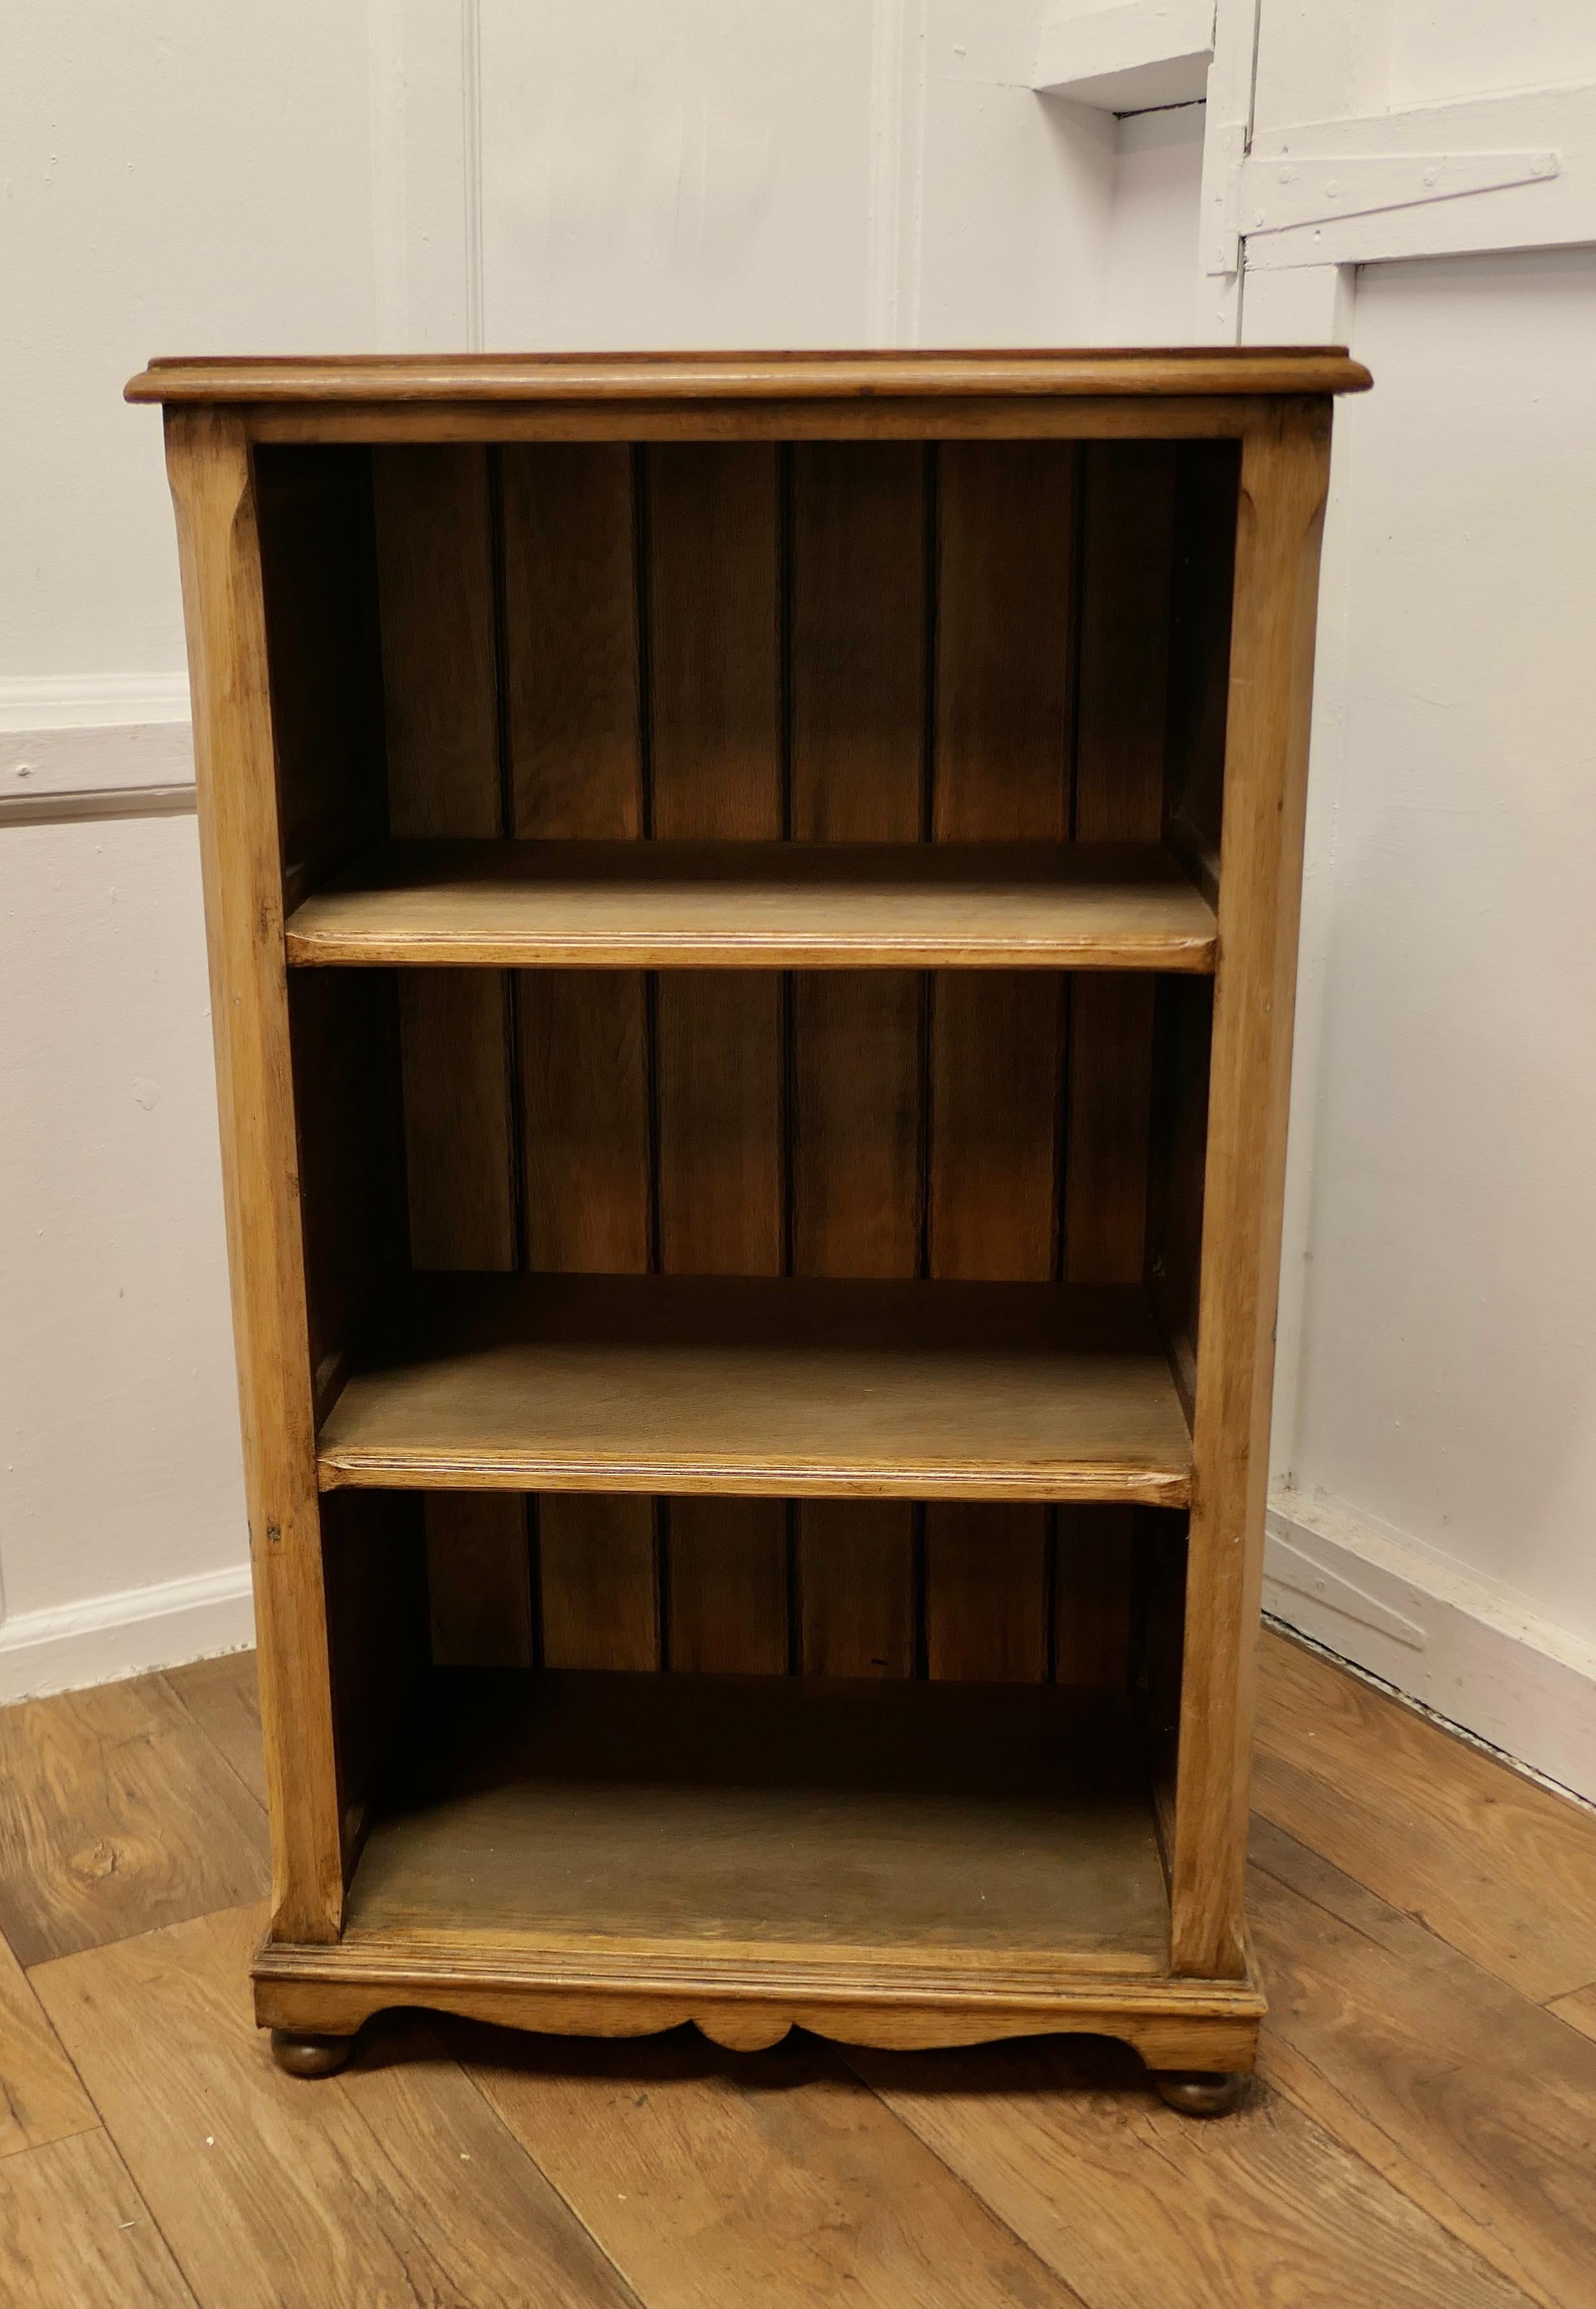 A Superb Arts and Crafts Golden Oak Open Shelves  

This is a good quality sturdy piece, built in Golden Oak in the Arts and Crafts style 
The shelf has panelled sides and fixed shelves, these have moulded front edges
The unit is in good condition,